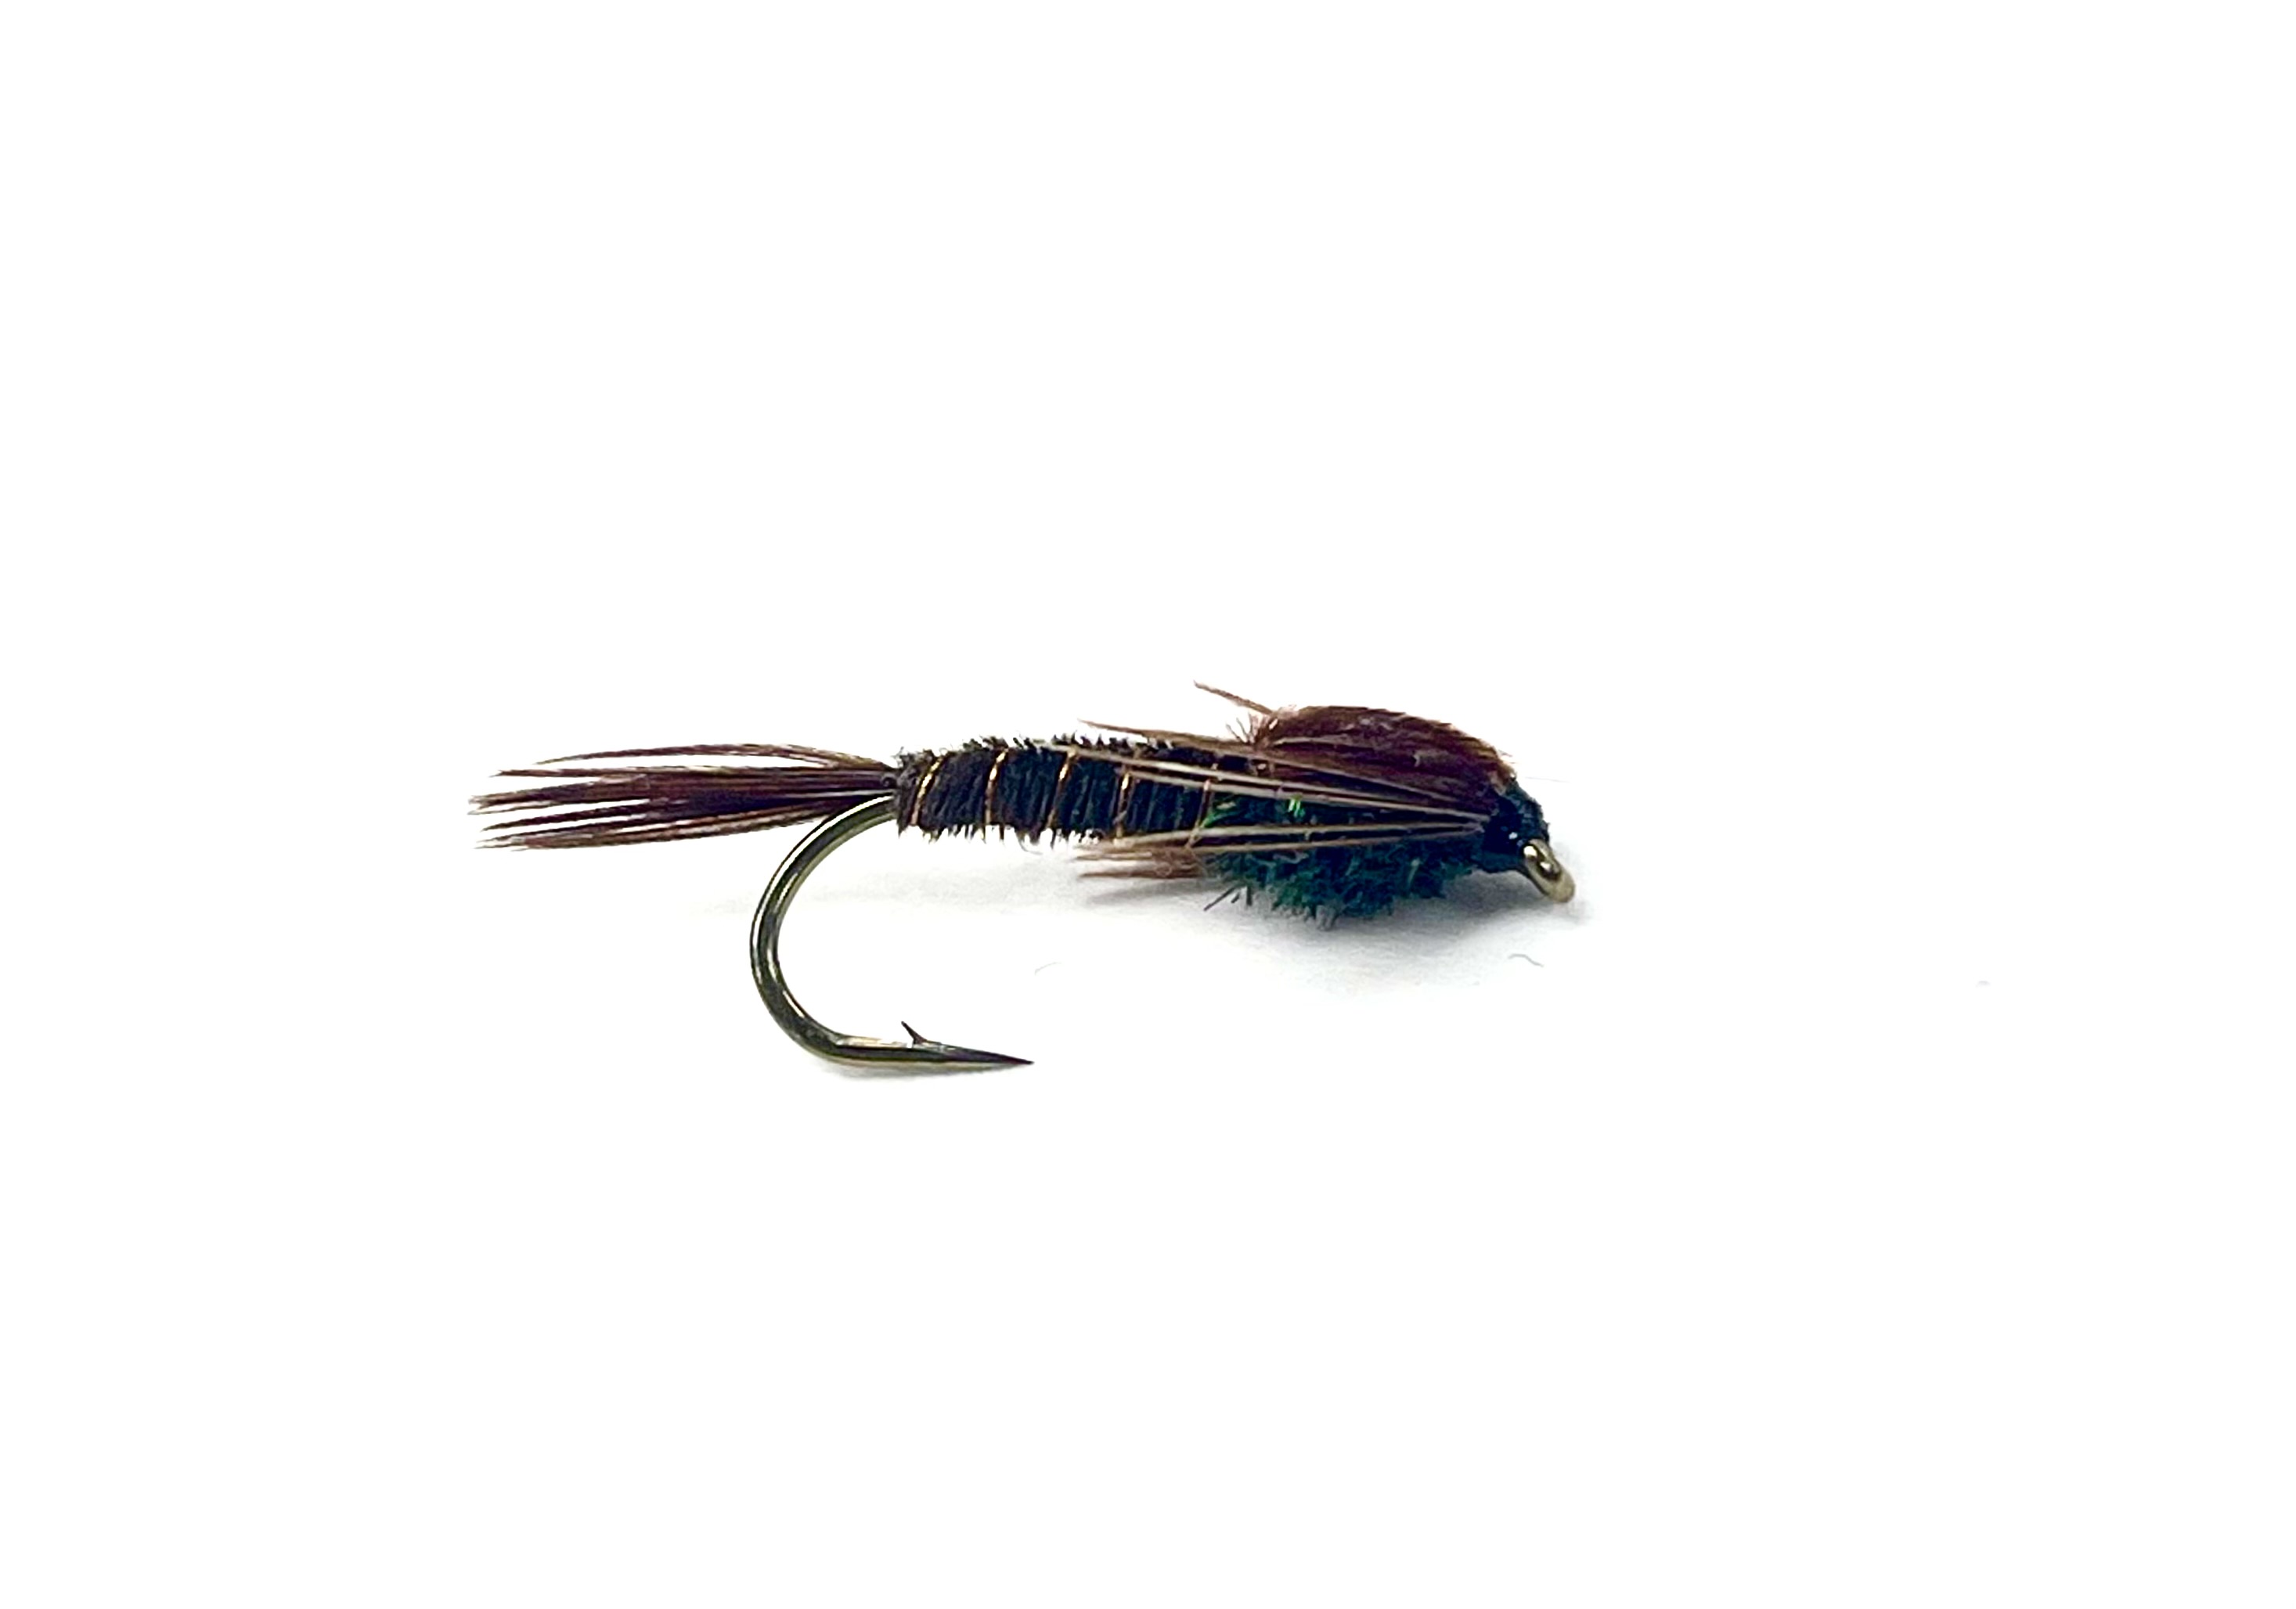 FAD Pheasant Tail Nymph - Natural - Size 14